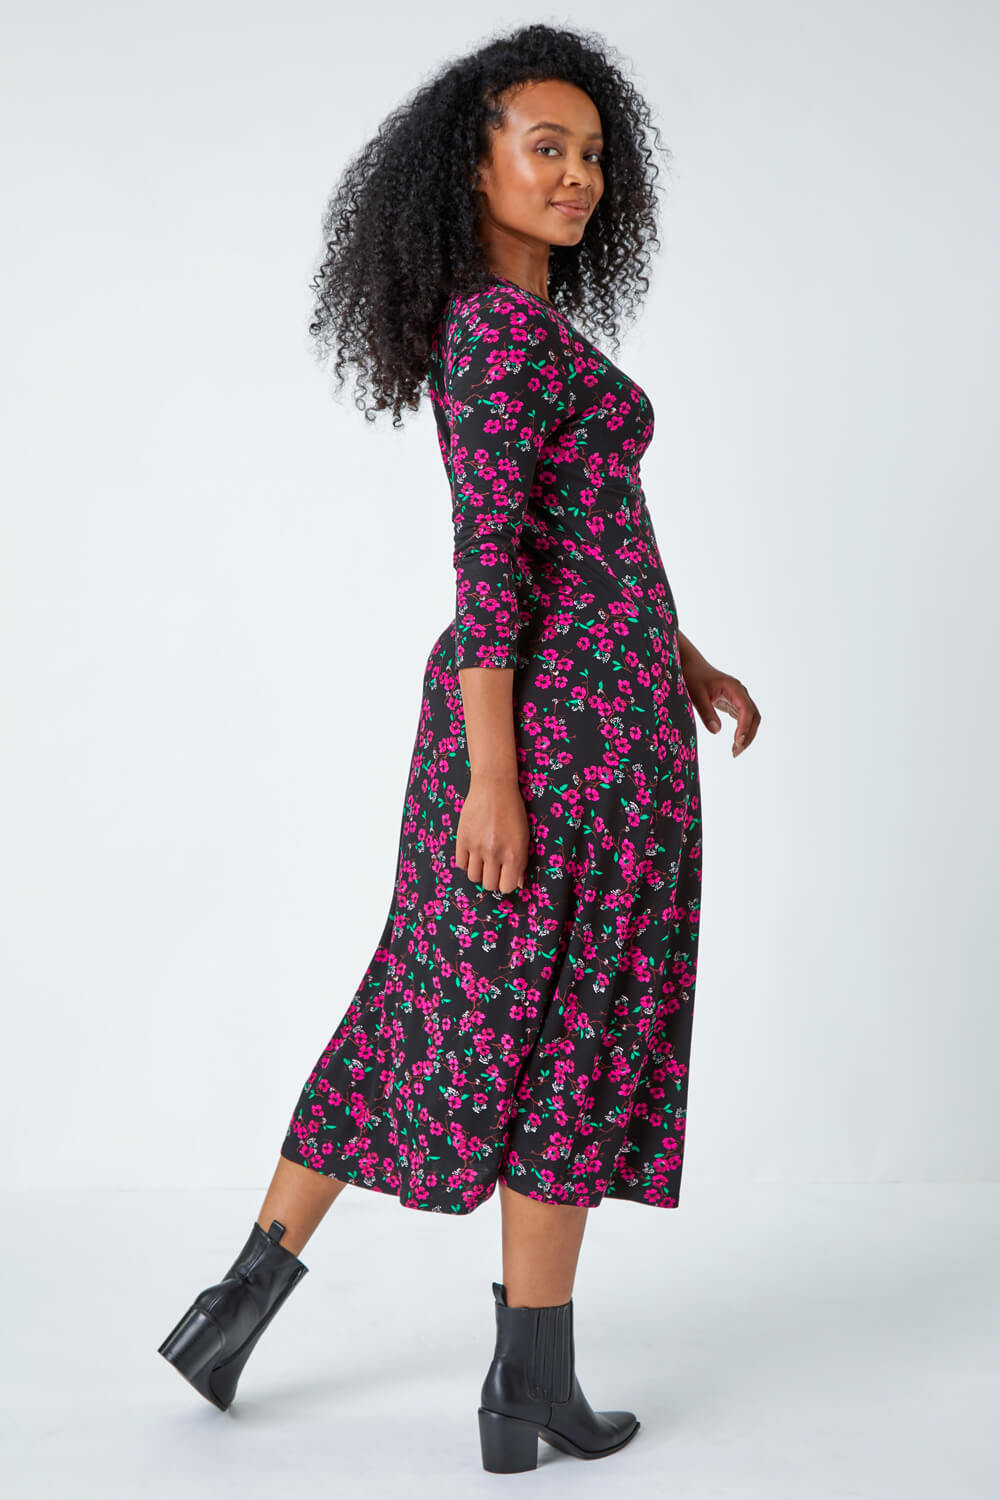 PINK Petite Floral Knot Front Stretch Dress, Image 4 of 5